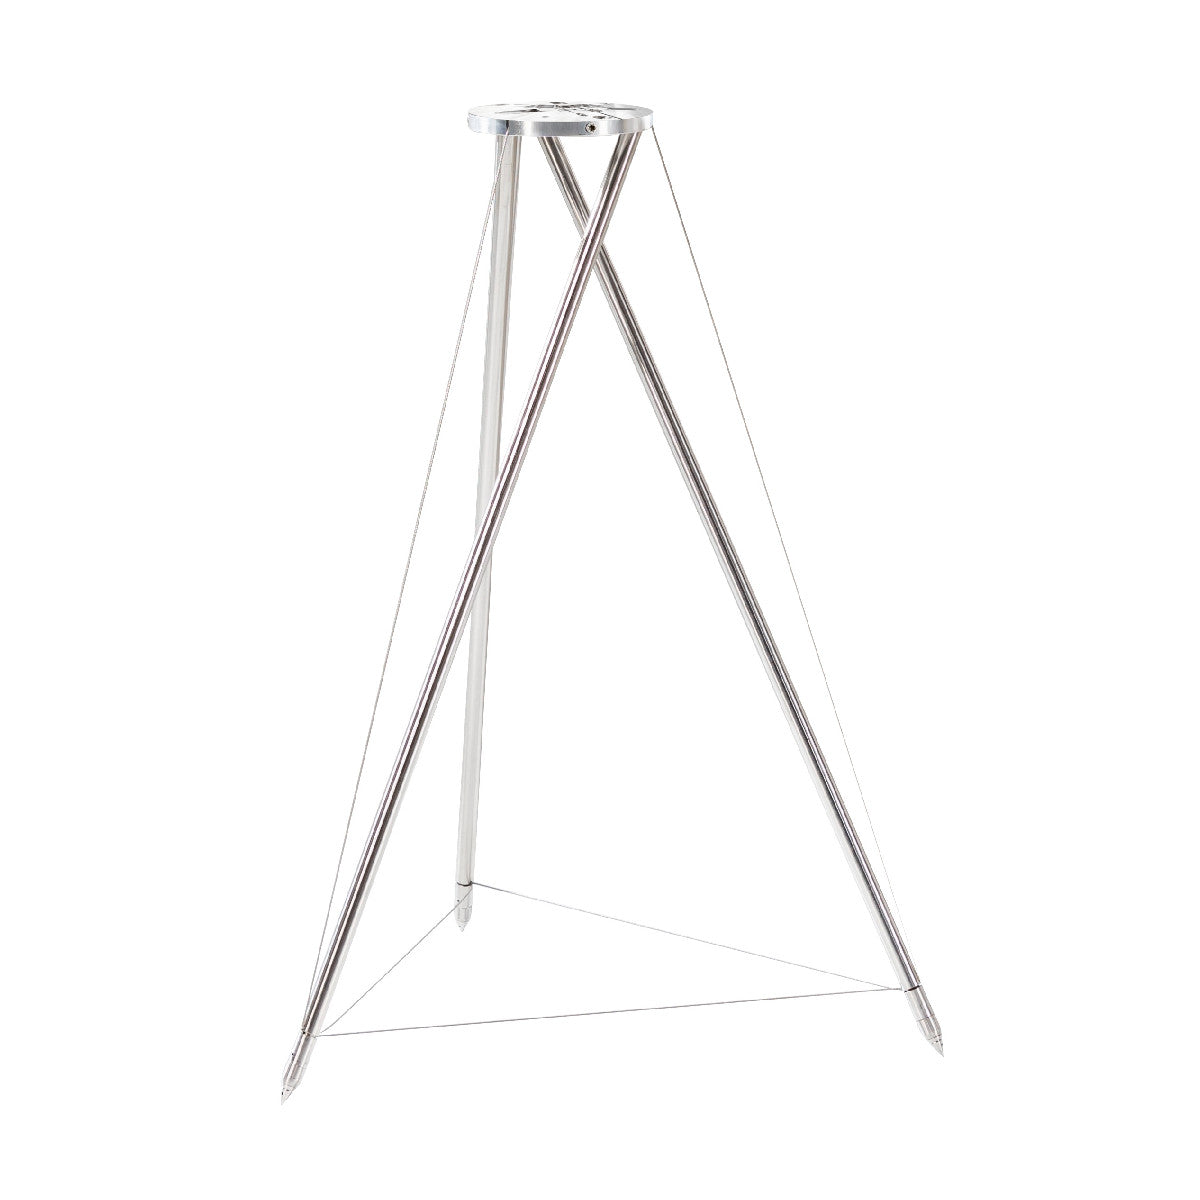 Tensegrity with an Adapter Plate